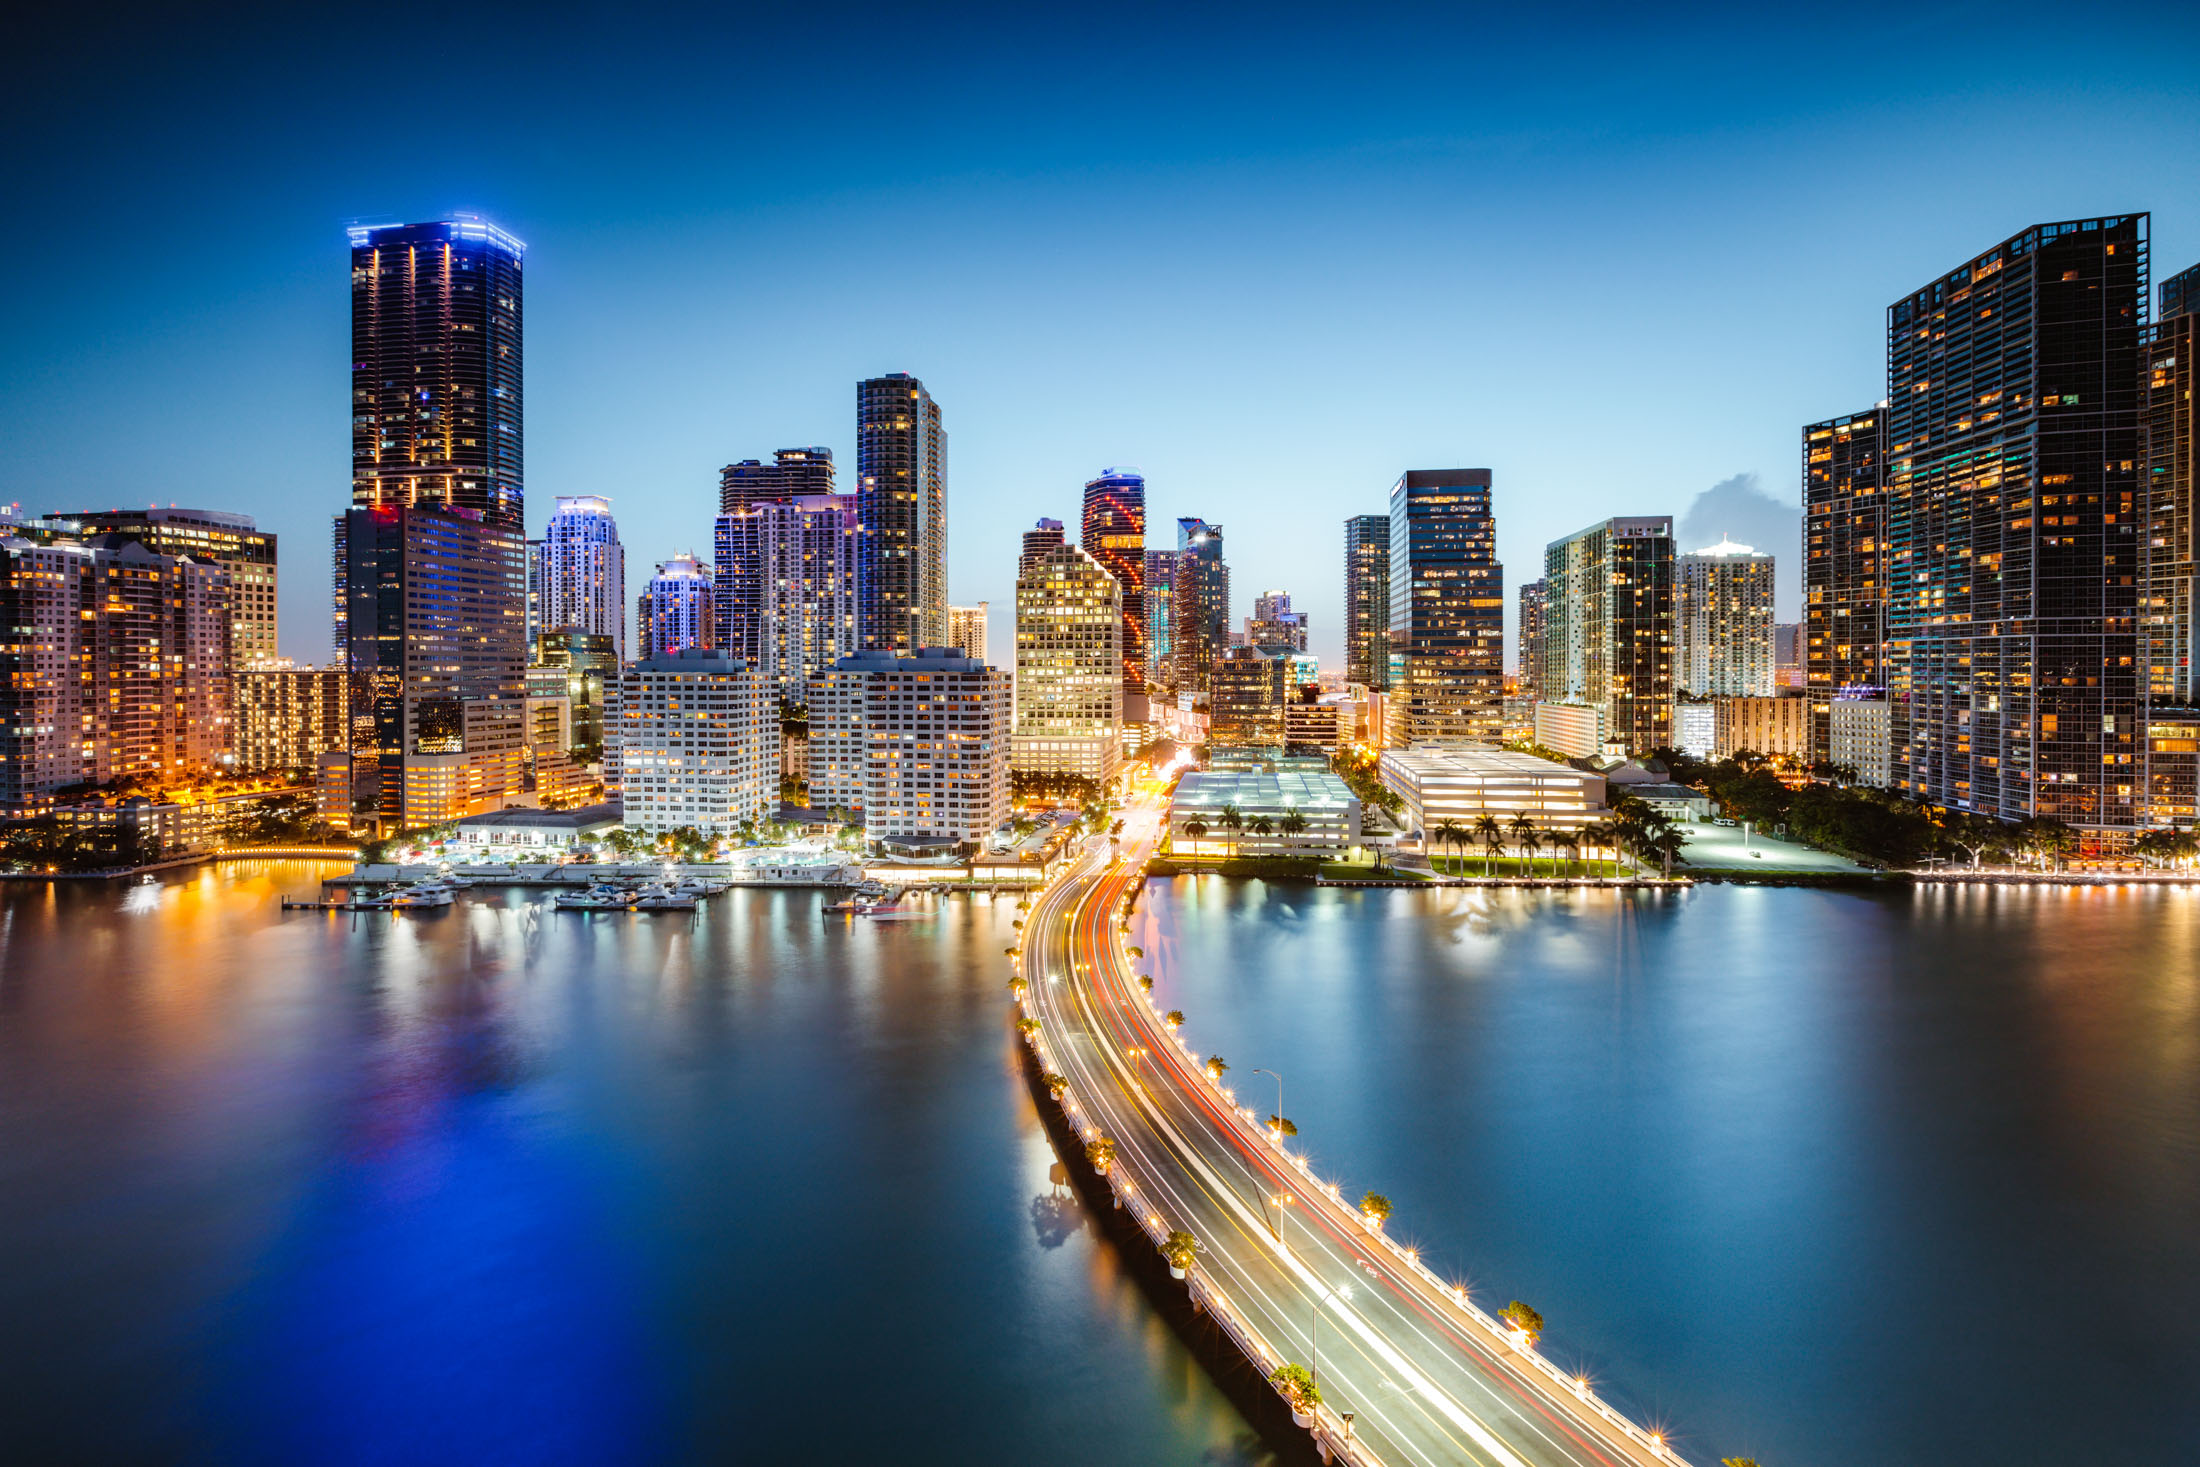 The skyline of Miami, which has seen a major slowdown in super-prime residential sales.